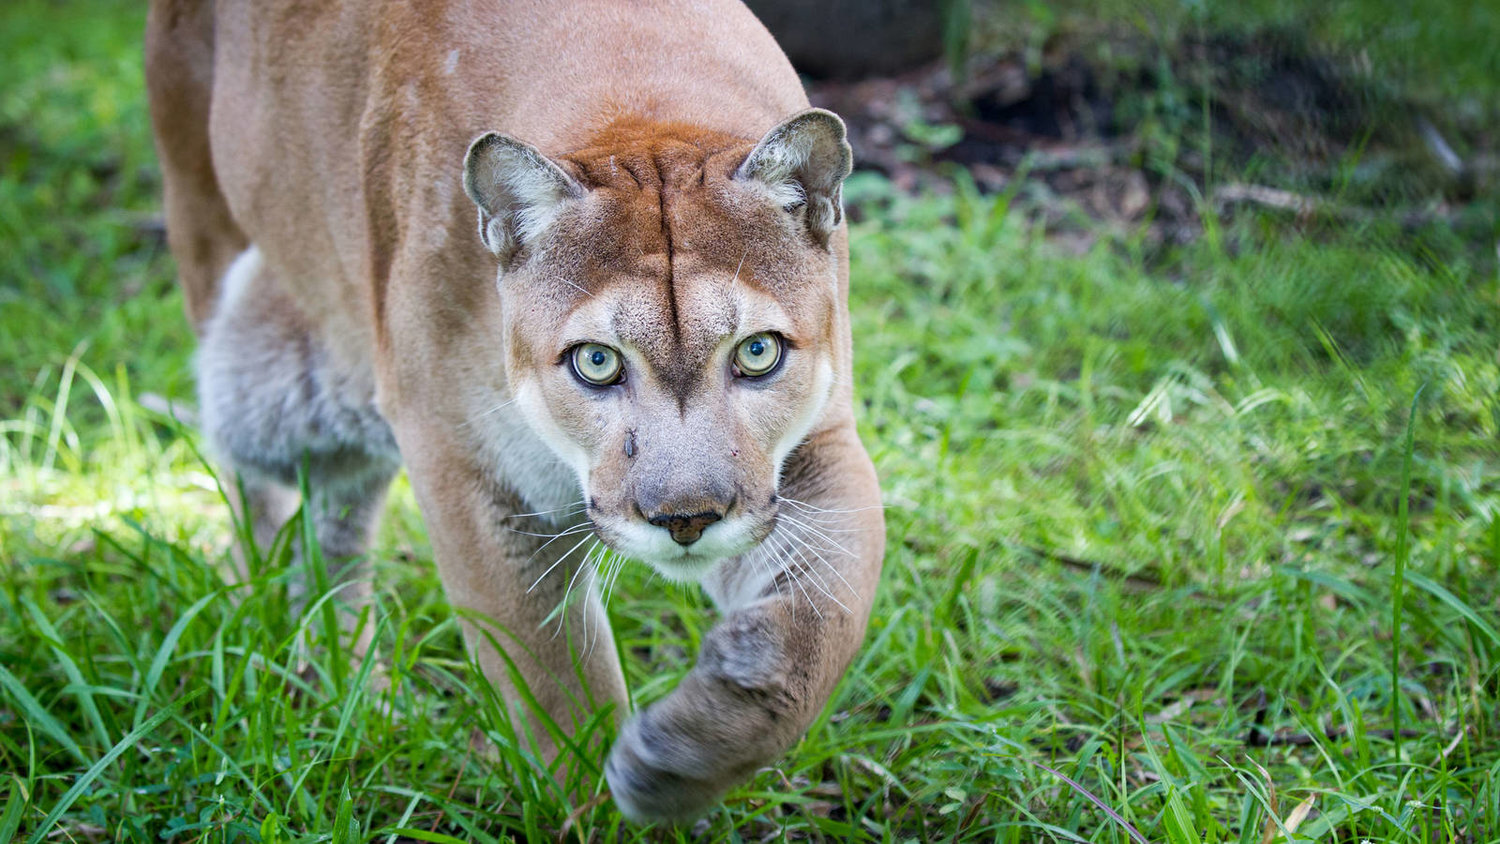 The Florida panther, one of the world's most endangered mammals.